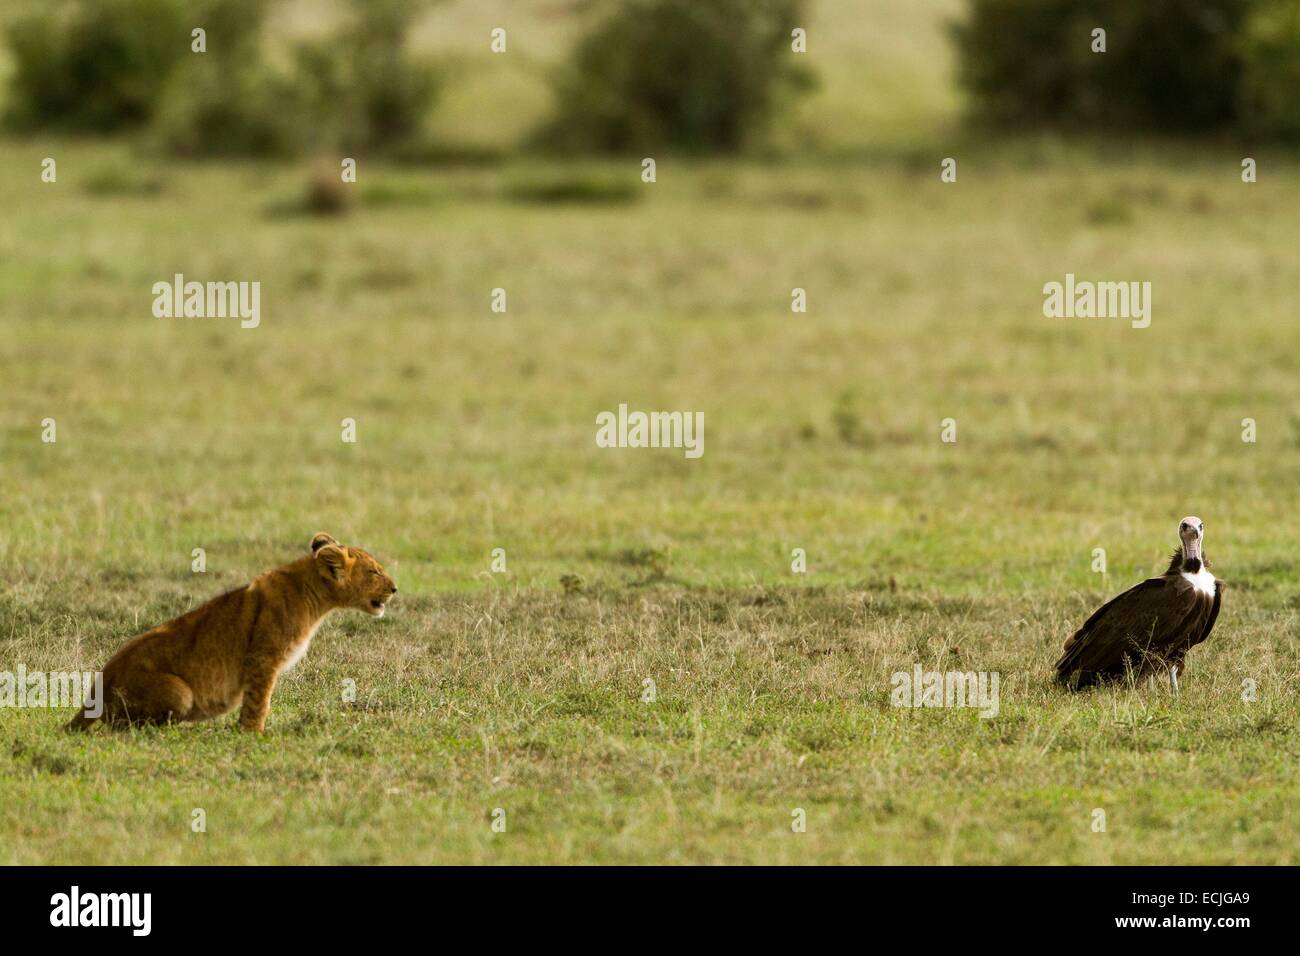 Kenya, Masai-Mara game reserve, lion (Panthera leo), cub face to face with one vulture Stock Photo